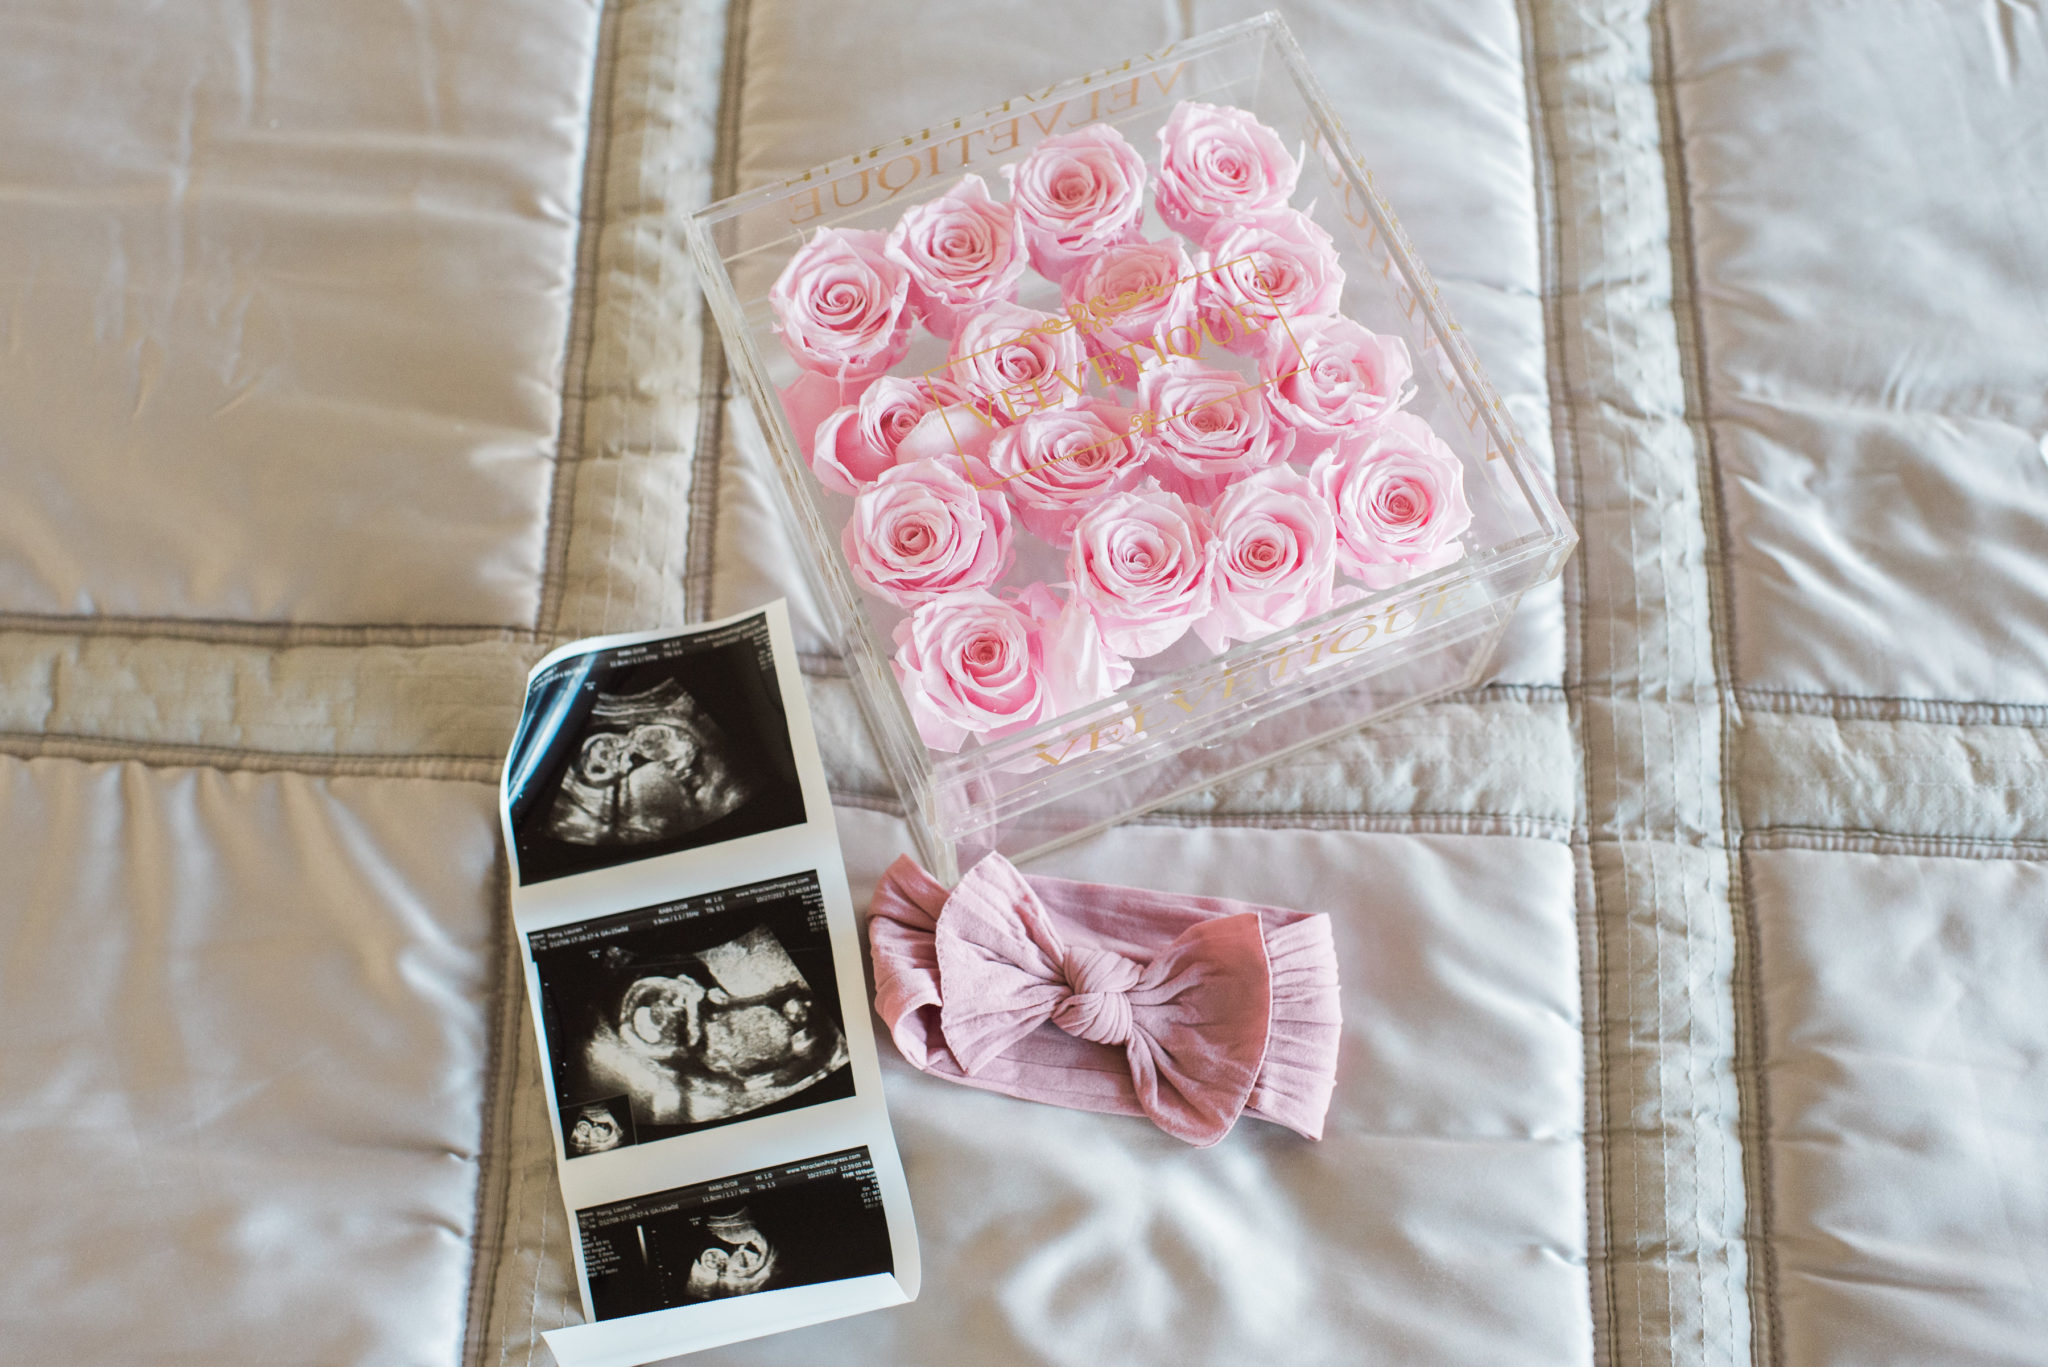 its a girl announcement and gender reveal idea - Gender Reveal Idea: It's a ... Boy or Girl?? by popular Las Vegas lifestyle blogger Outfits & Outings